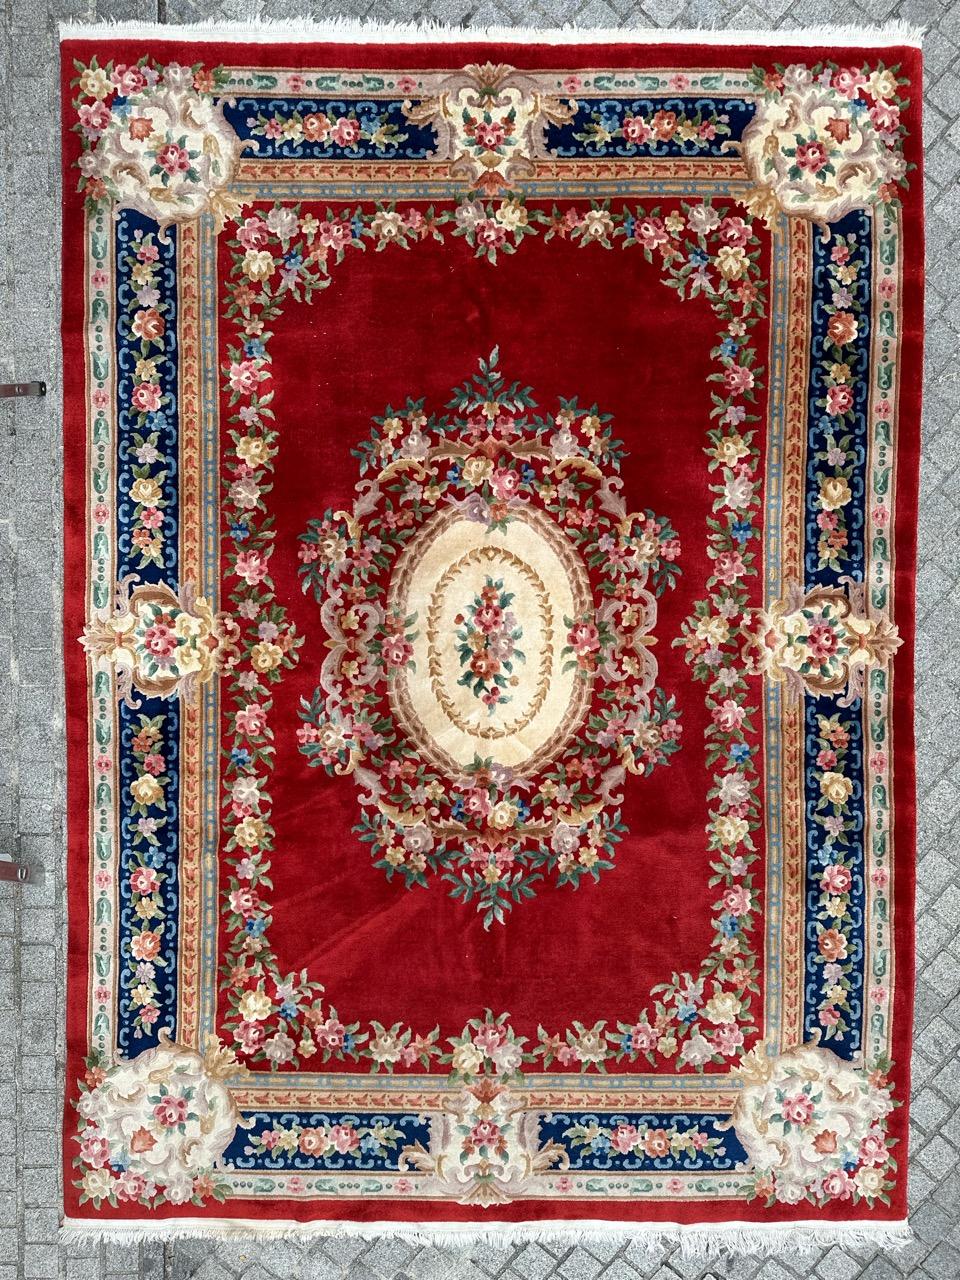  Exquisite Large Chinese Rug with Stunning Floral Design!

This remarkable rug boasts a vibrant red background that sets the stage for a striking white medallion. The medallion is beautifully adorned by a bouquet of flowers in shades of green,